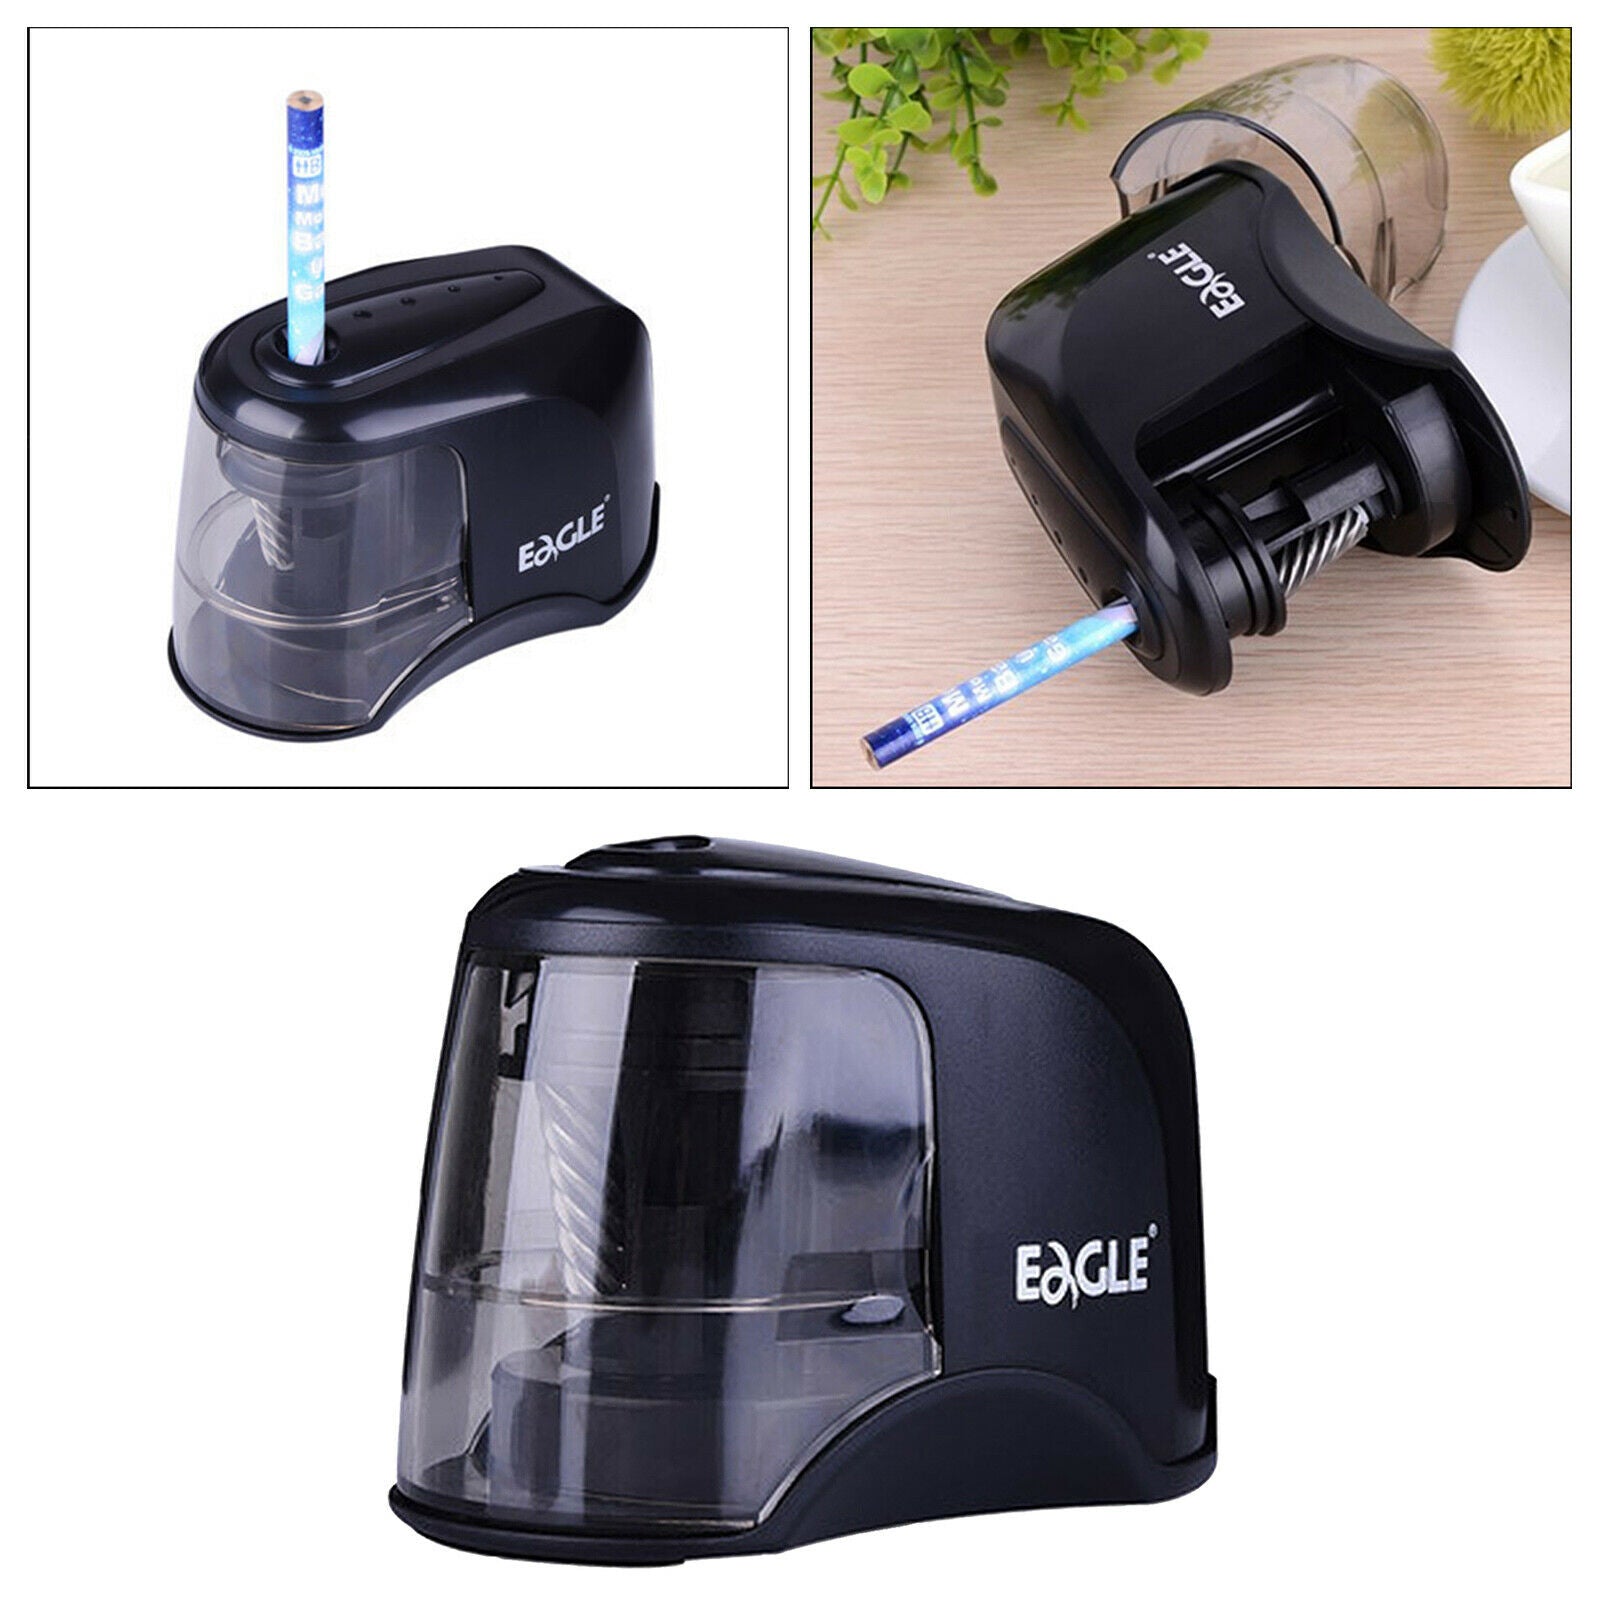 Electric Pencil Sharpener Battery Operated & USB Charge Automatic Sharpener